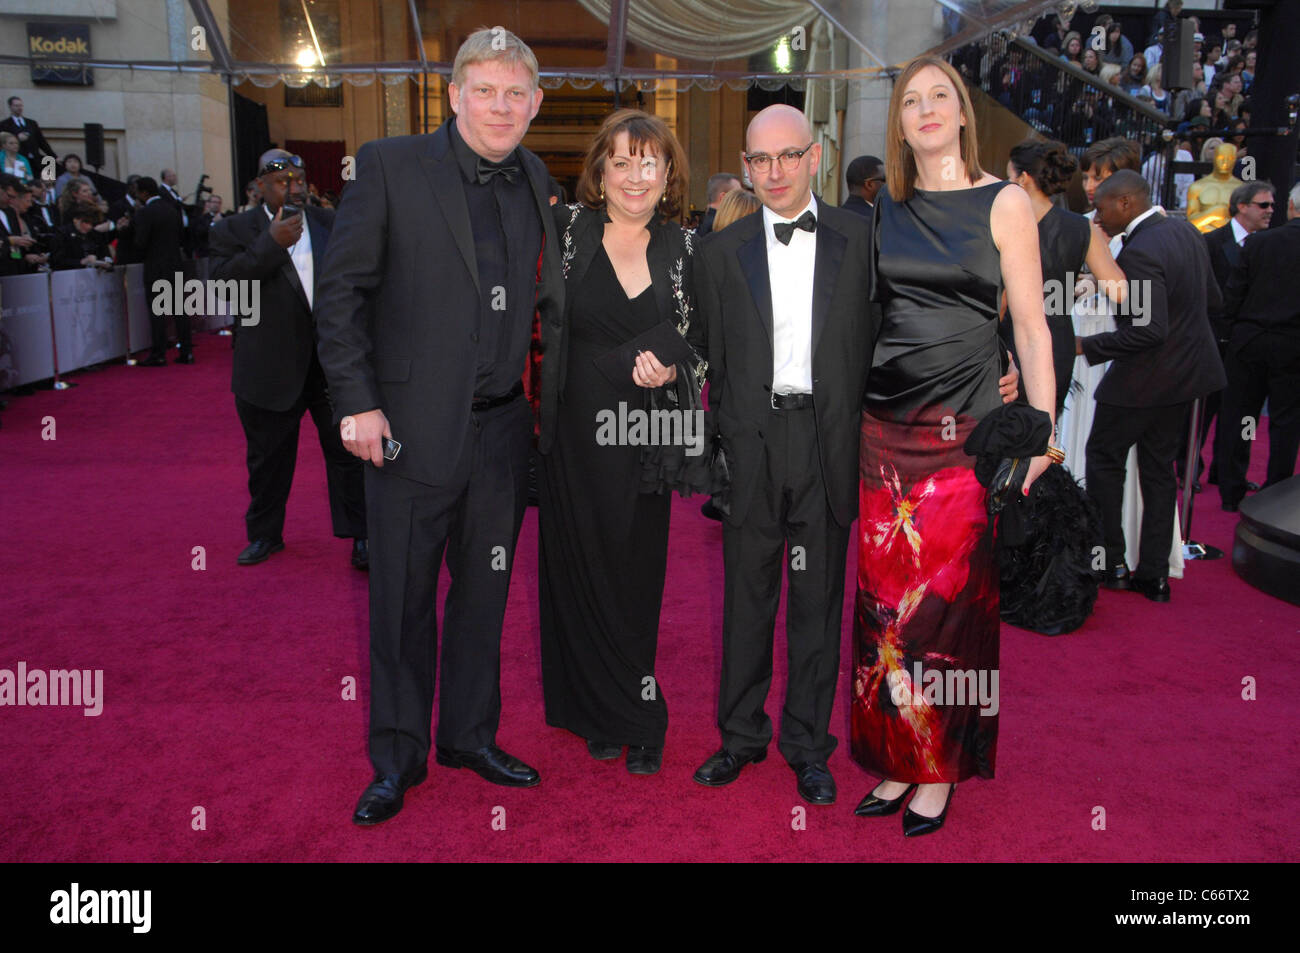 Danny Cohen, Eve Stewart, Judy Farr at arrivals for The 83rd Academy Awards Oscars - Arrivals Part 1, The Kodak Theatre, Los Angeles, CA February 27, 2011. Photo By: Elizabeth Goodenough/Everett Collection Stock Photo